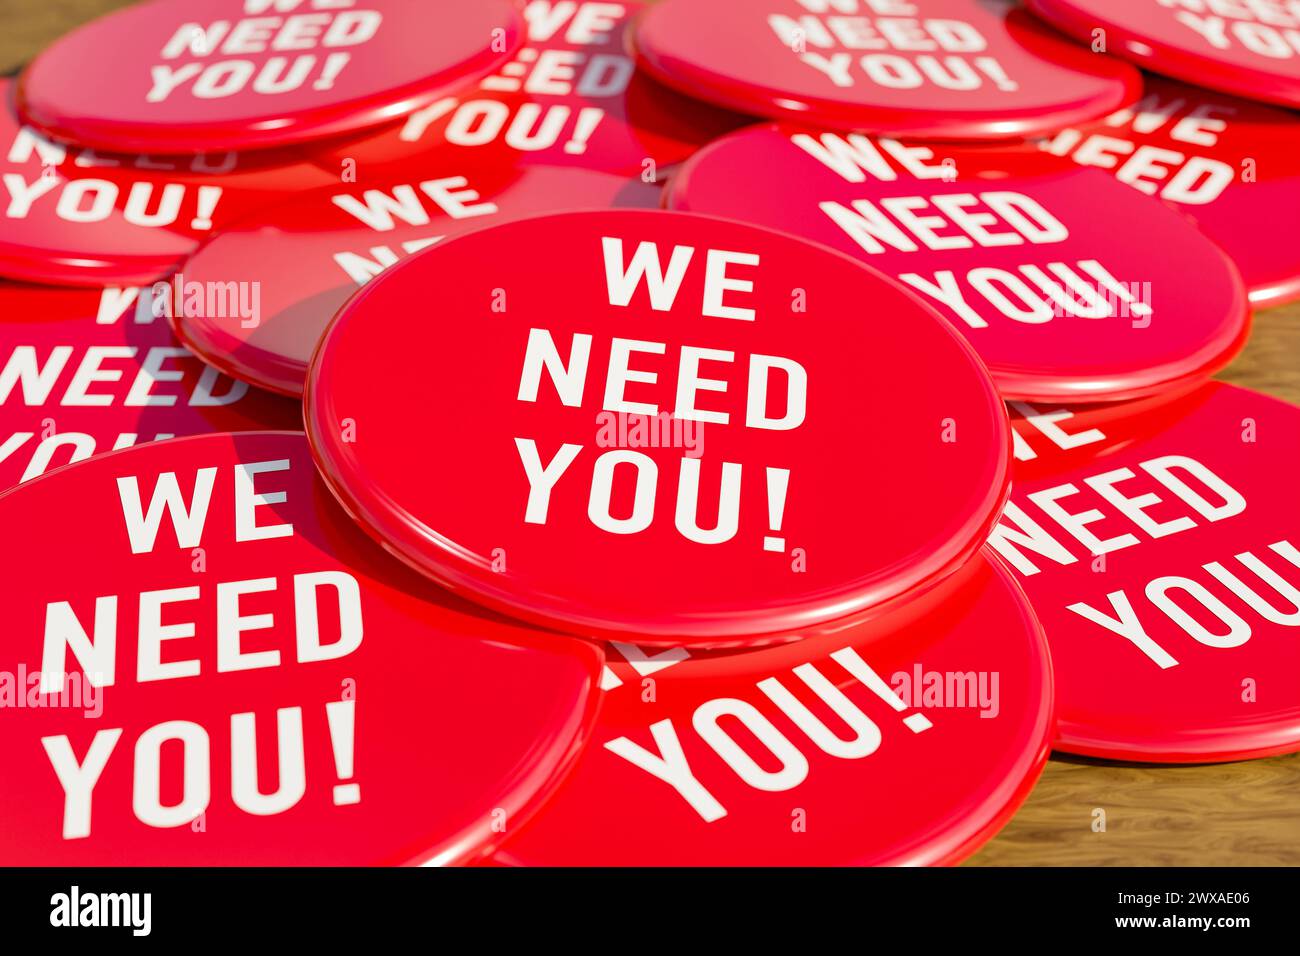 We need you. We need you. Red badges laying on the table with the message We need you . Hiring, searching, look for, applying, recruitment. 3D illustr Stock Photo